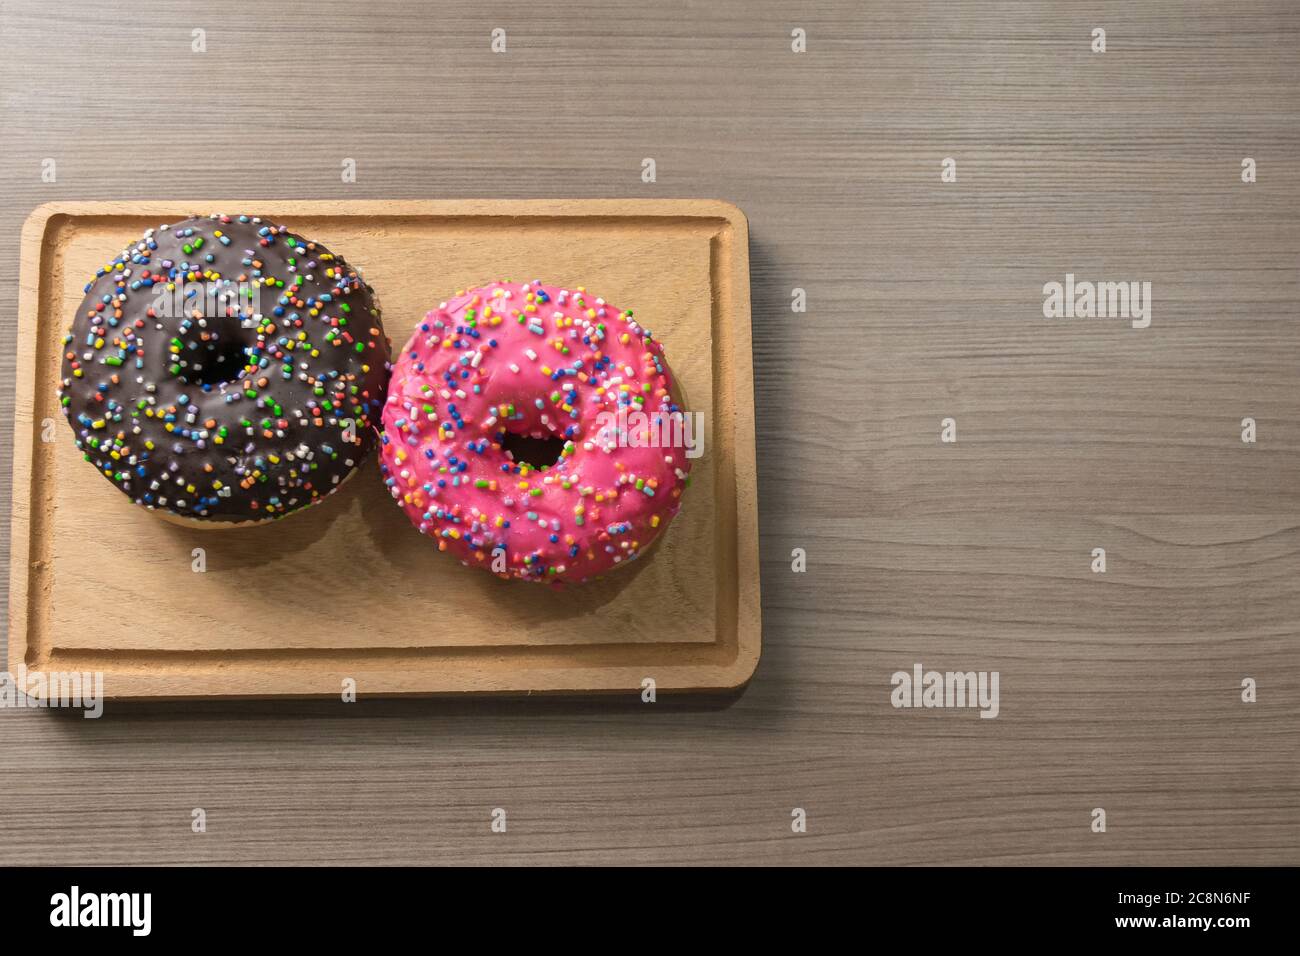 Delicious donuts on wood Stock Photo